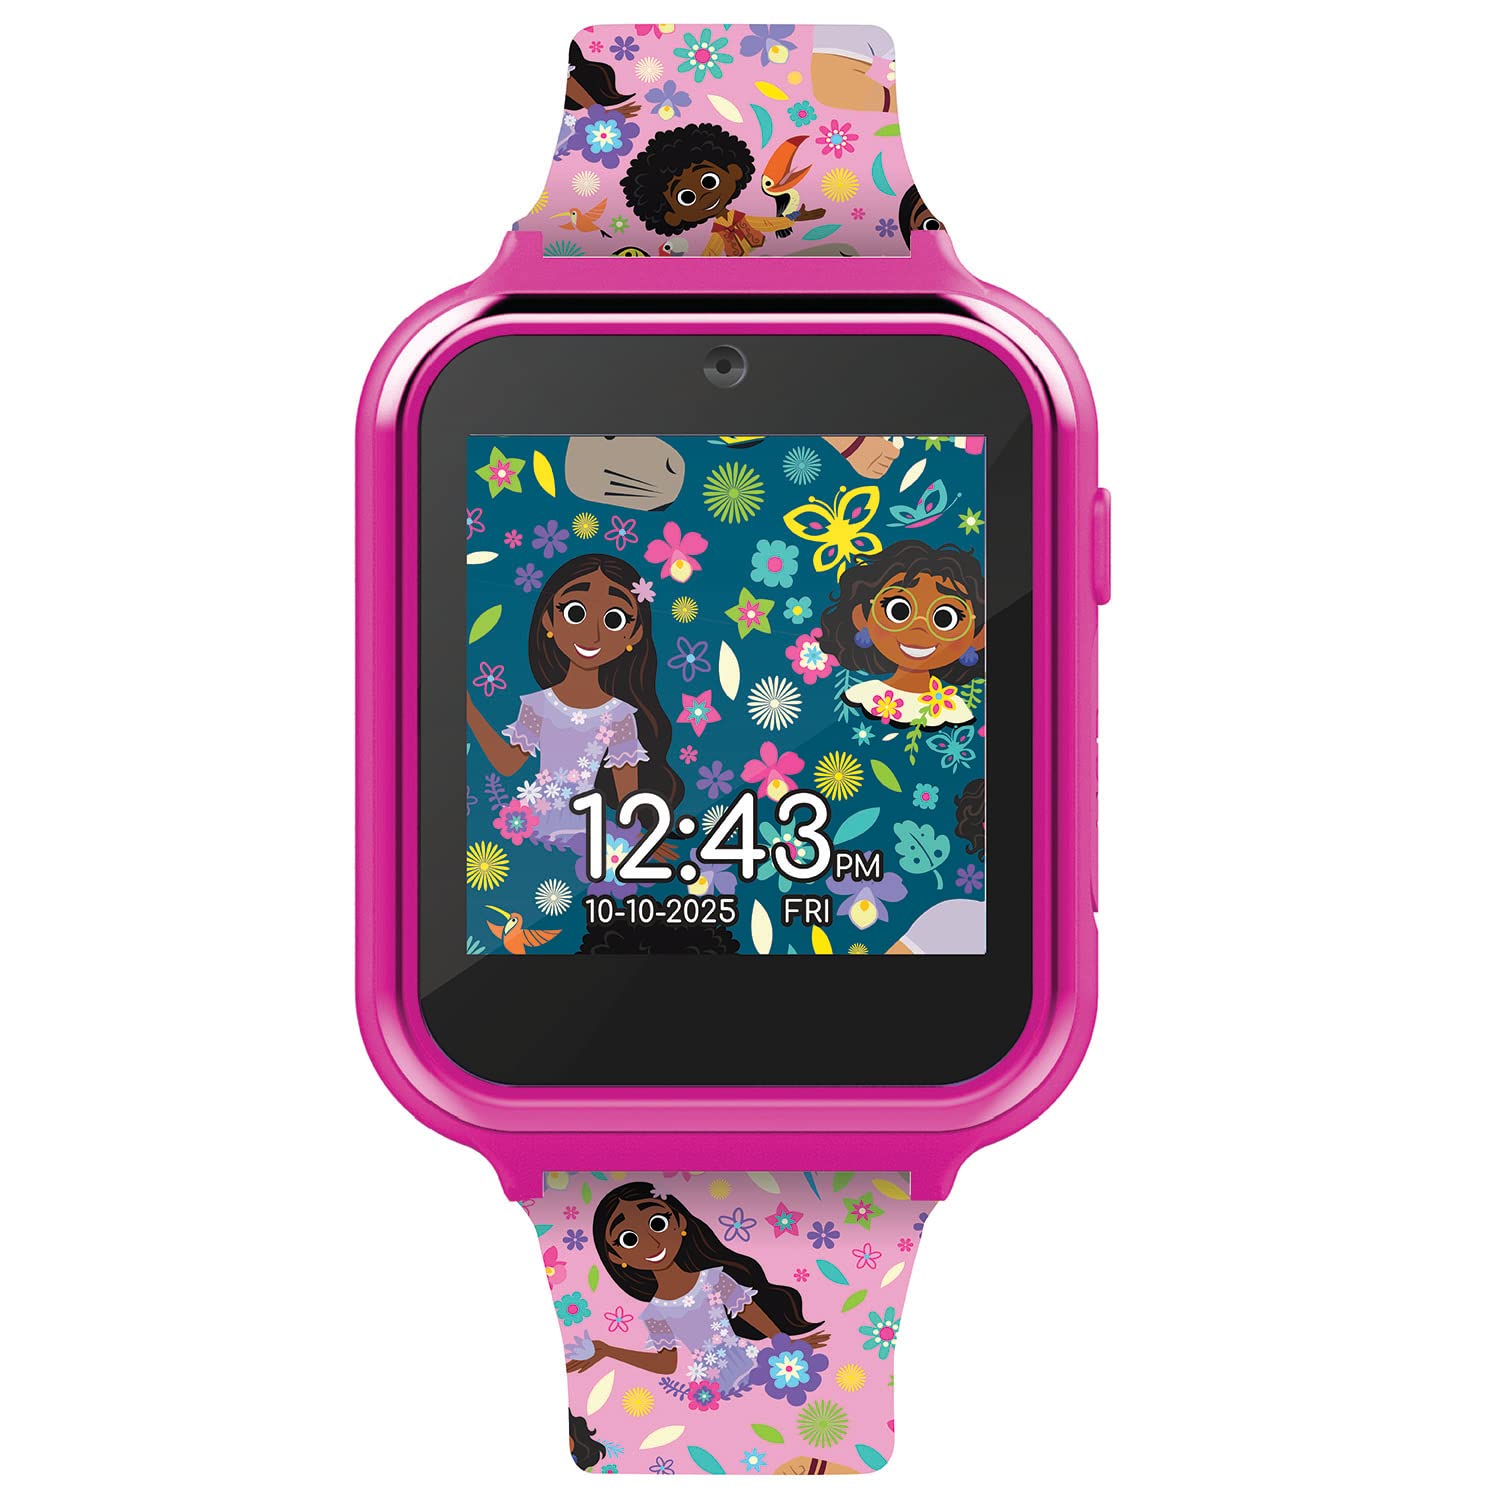 Accutime Encanto Kids Blue Educational Learning Touchscreen Smart Watch Toy for Girls, Boys, Toddlers - Selfie Cam, Learning Games, Alarm, Calculator, Pedometer & More (Model: ENC4006AZ)